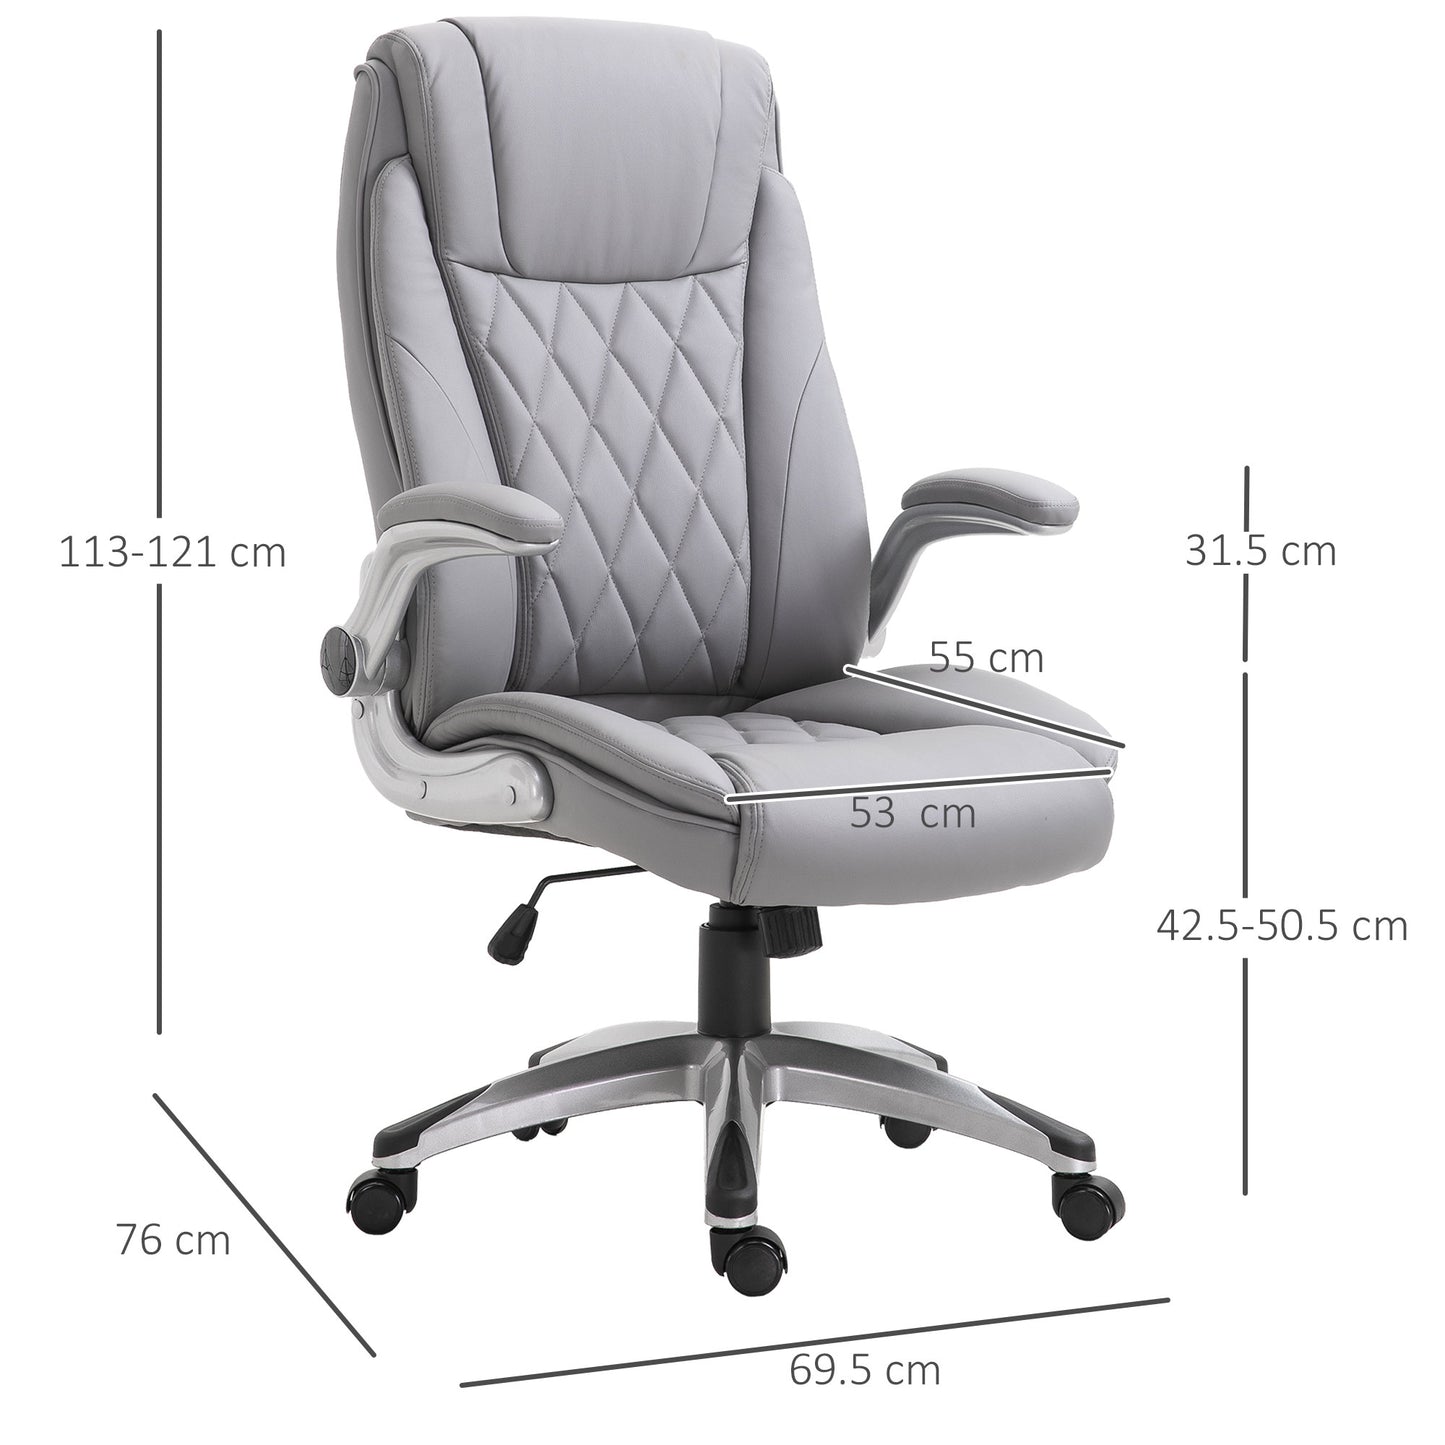 Vinsetto High Back Executive Office Chair Home Swivel PU Leather Ergonomic Chair, with Flip-up Arm, Wheels, Adjustable Height, Grey